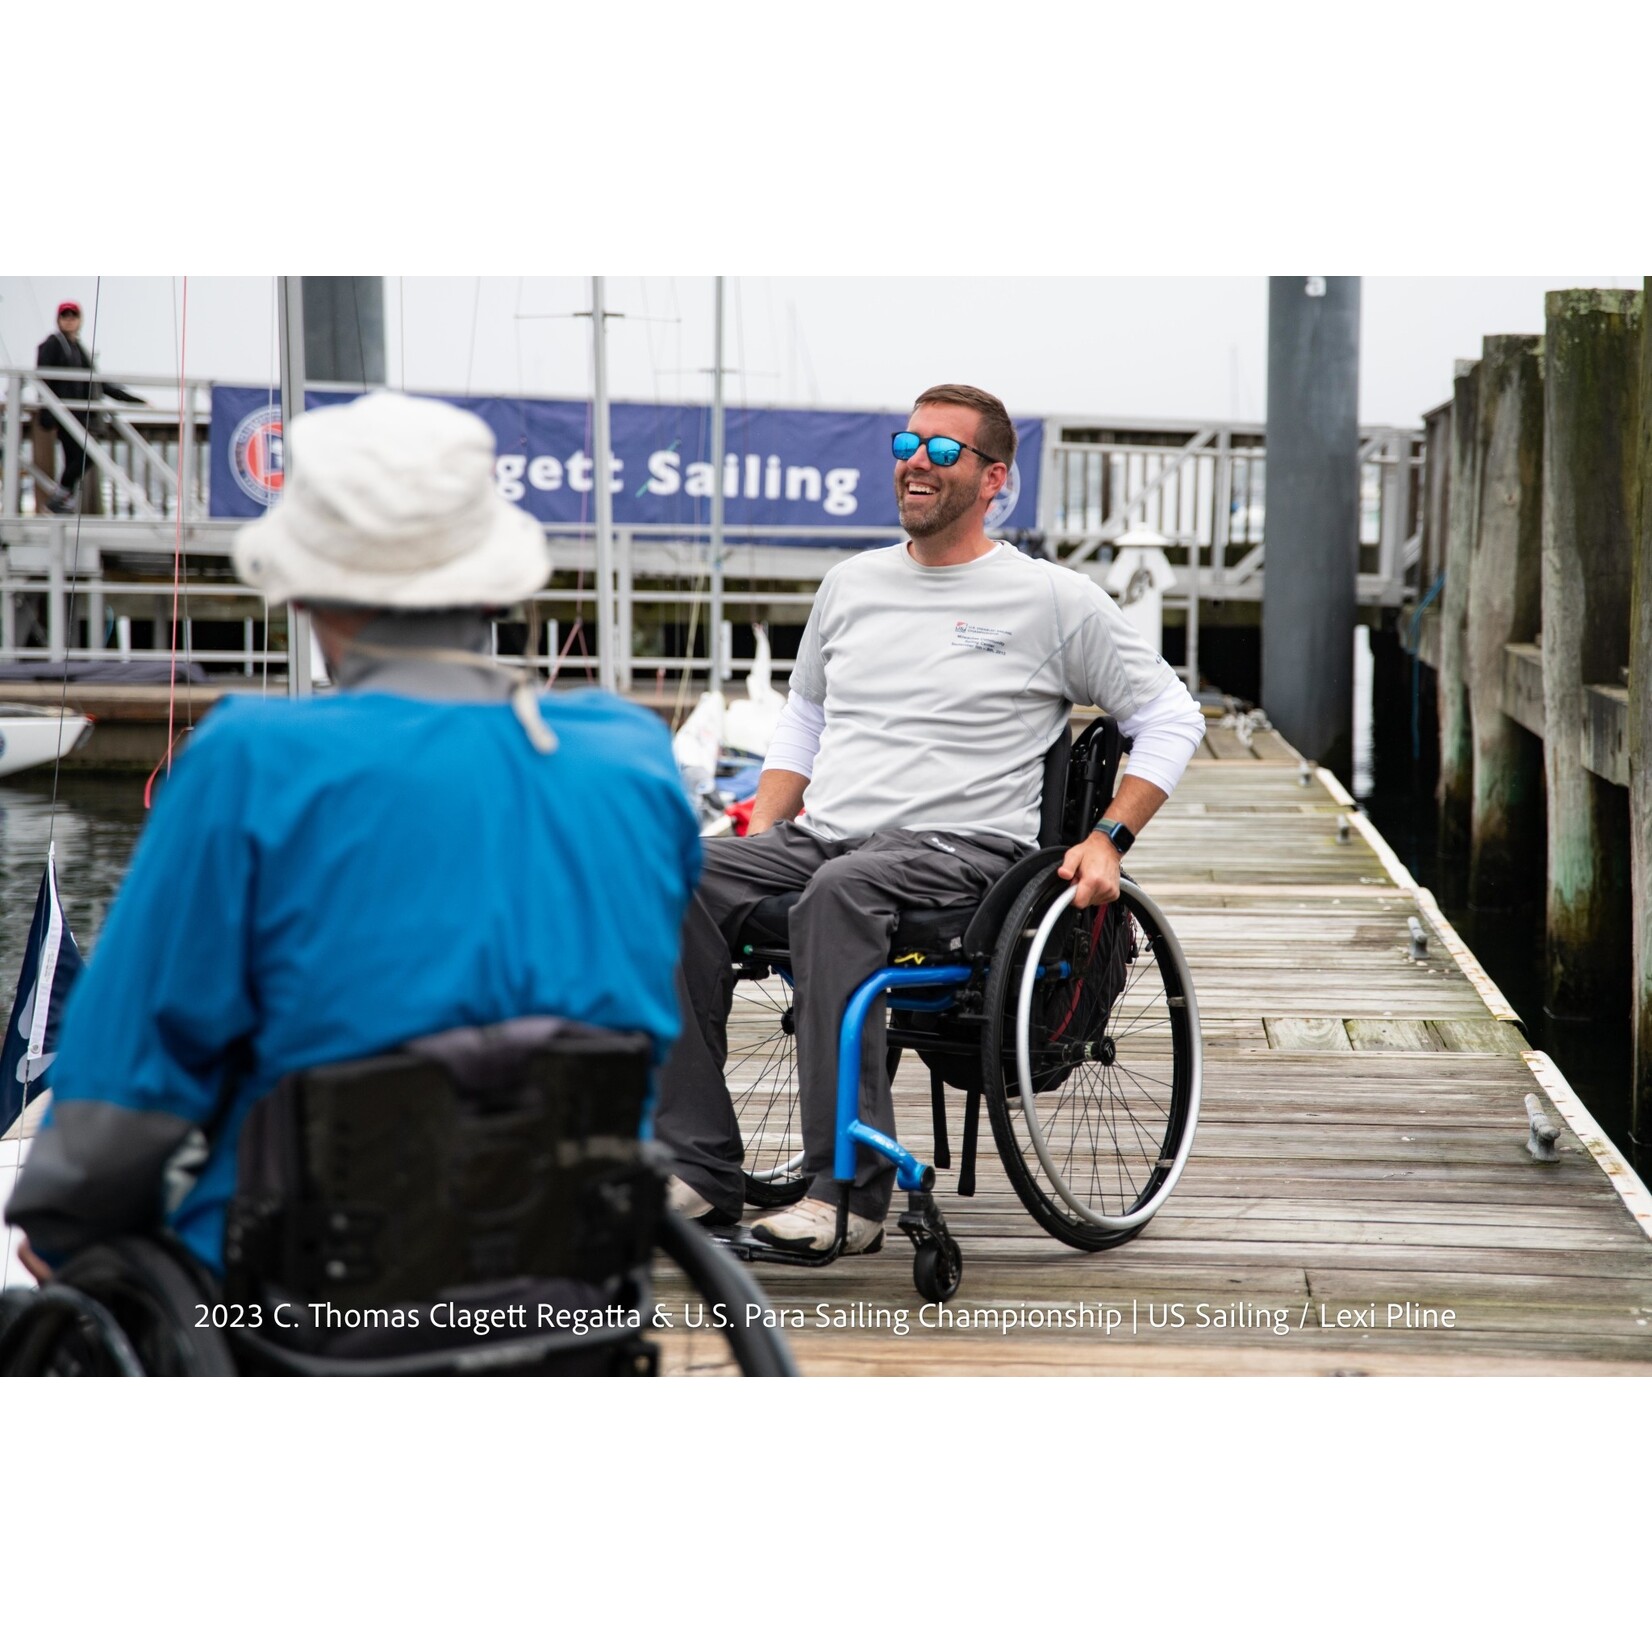 Gift Catalog Donation Grow the Sport: Support Adaptive Sailing